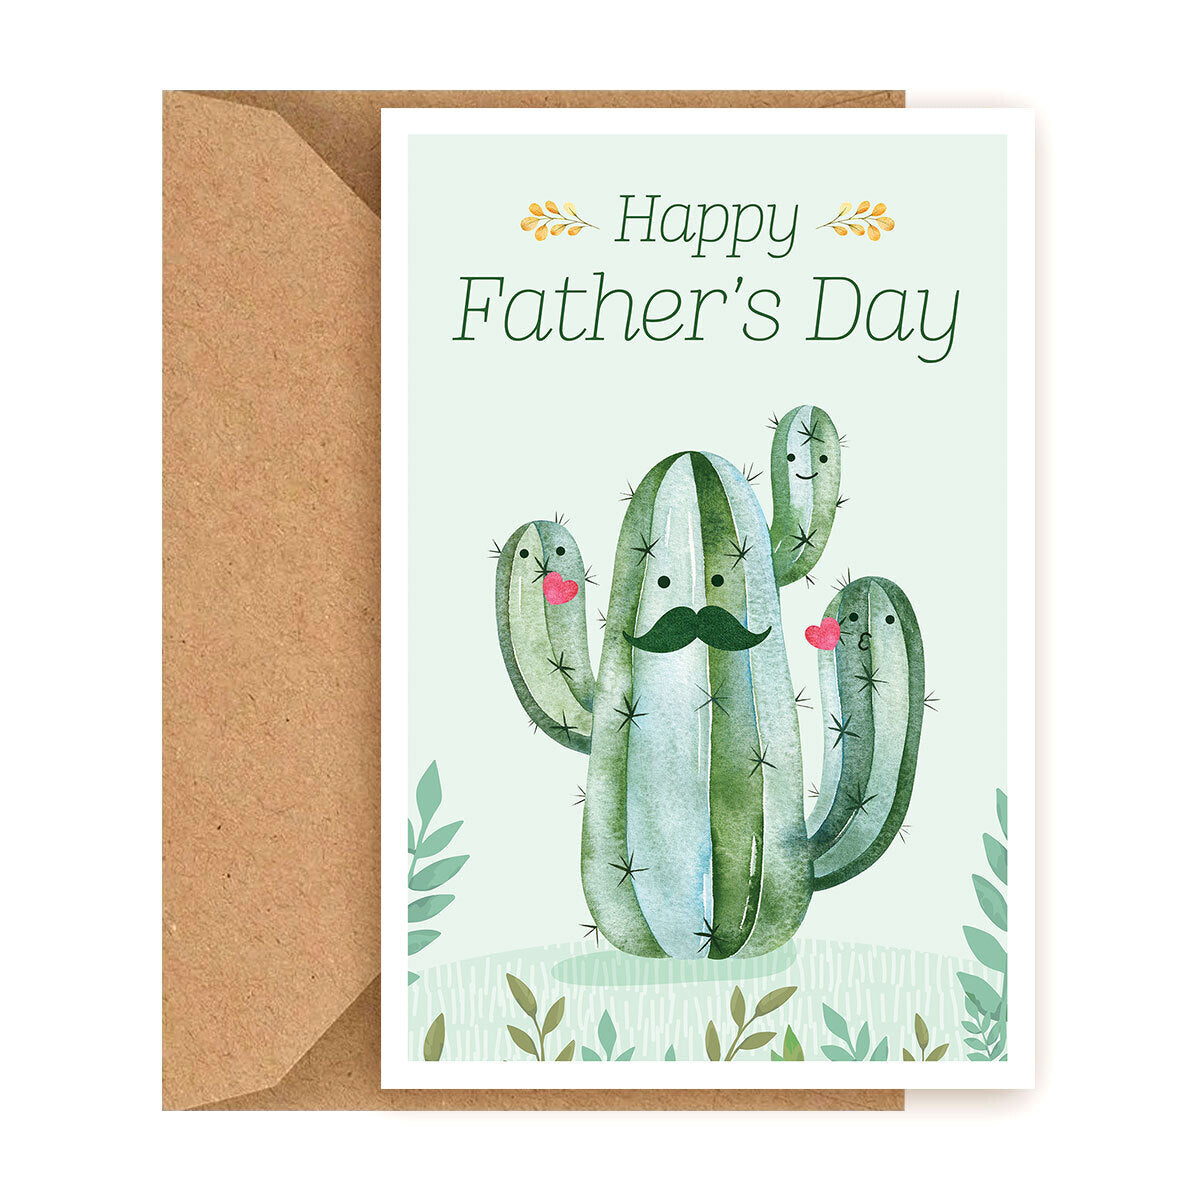 Father's day greeting cards, Father's day succulent card, Father's day cards 2023, Father's Day card ideas, Succulent dad card, card for Father's day, succulent card for Father's day, plant card